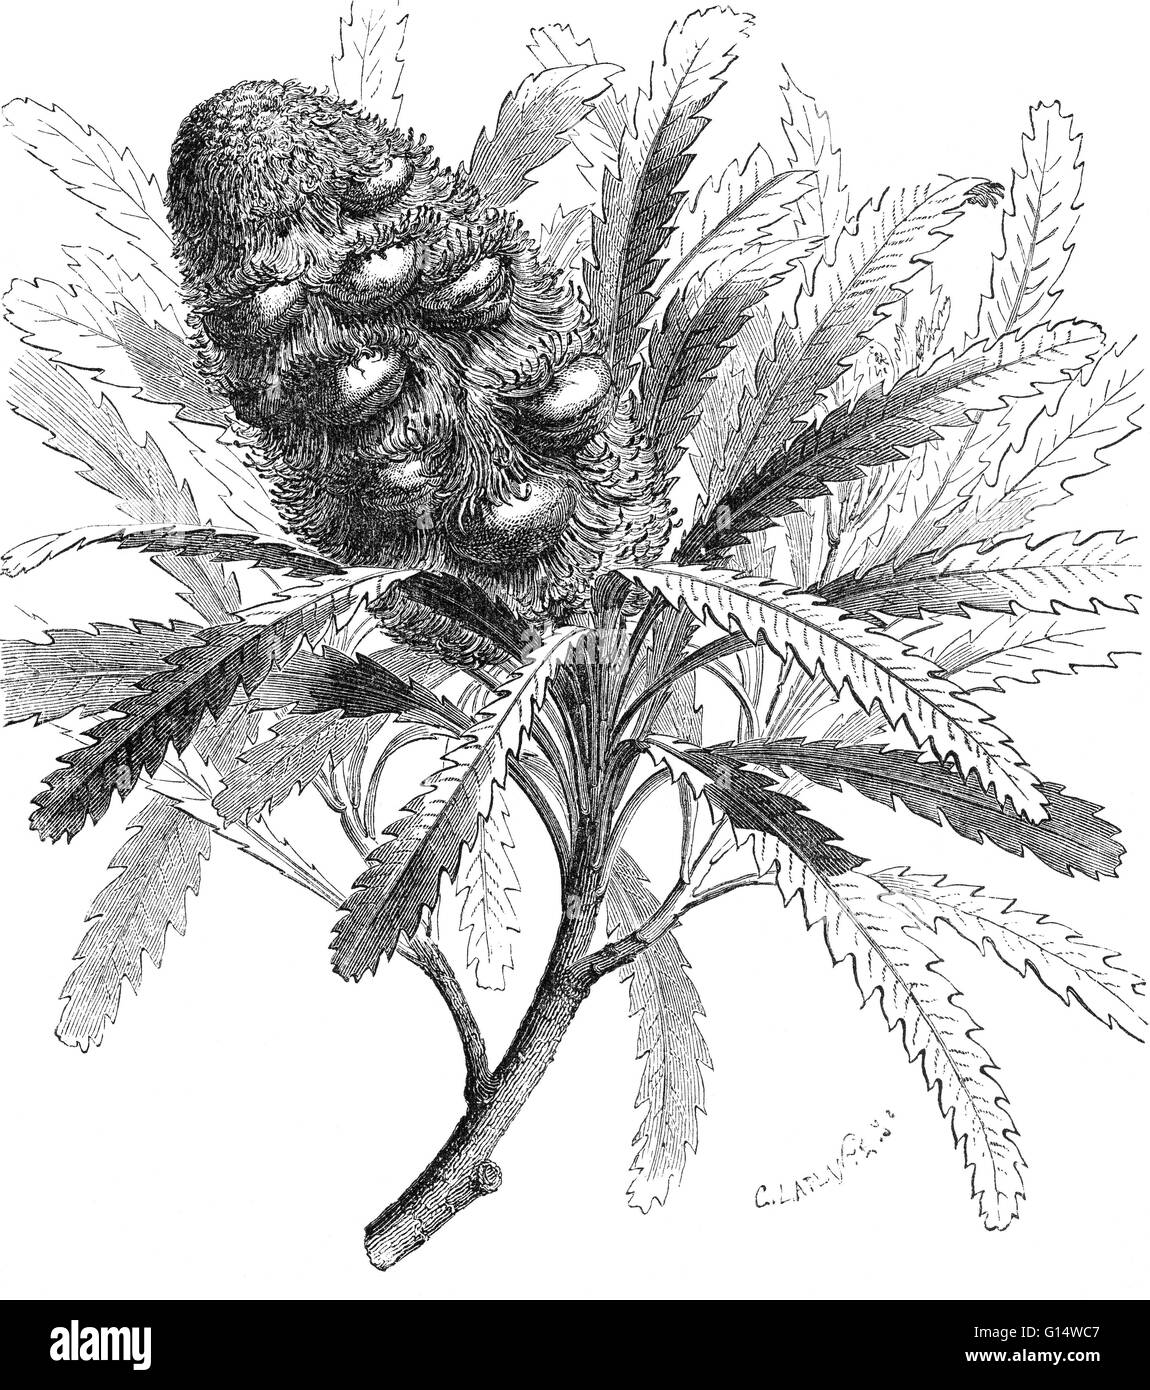 Fruit-branch of Banskia, taken from impressions left in rocks from the Eocene Epoch. It is different from any modern-day Banksia. Illustration from Louis Figuier's The World Before the Deluge, 1867 American edition. Stock Photo